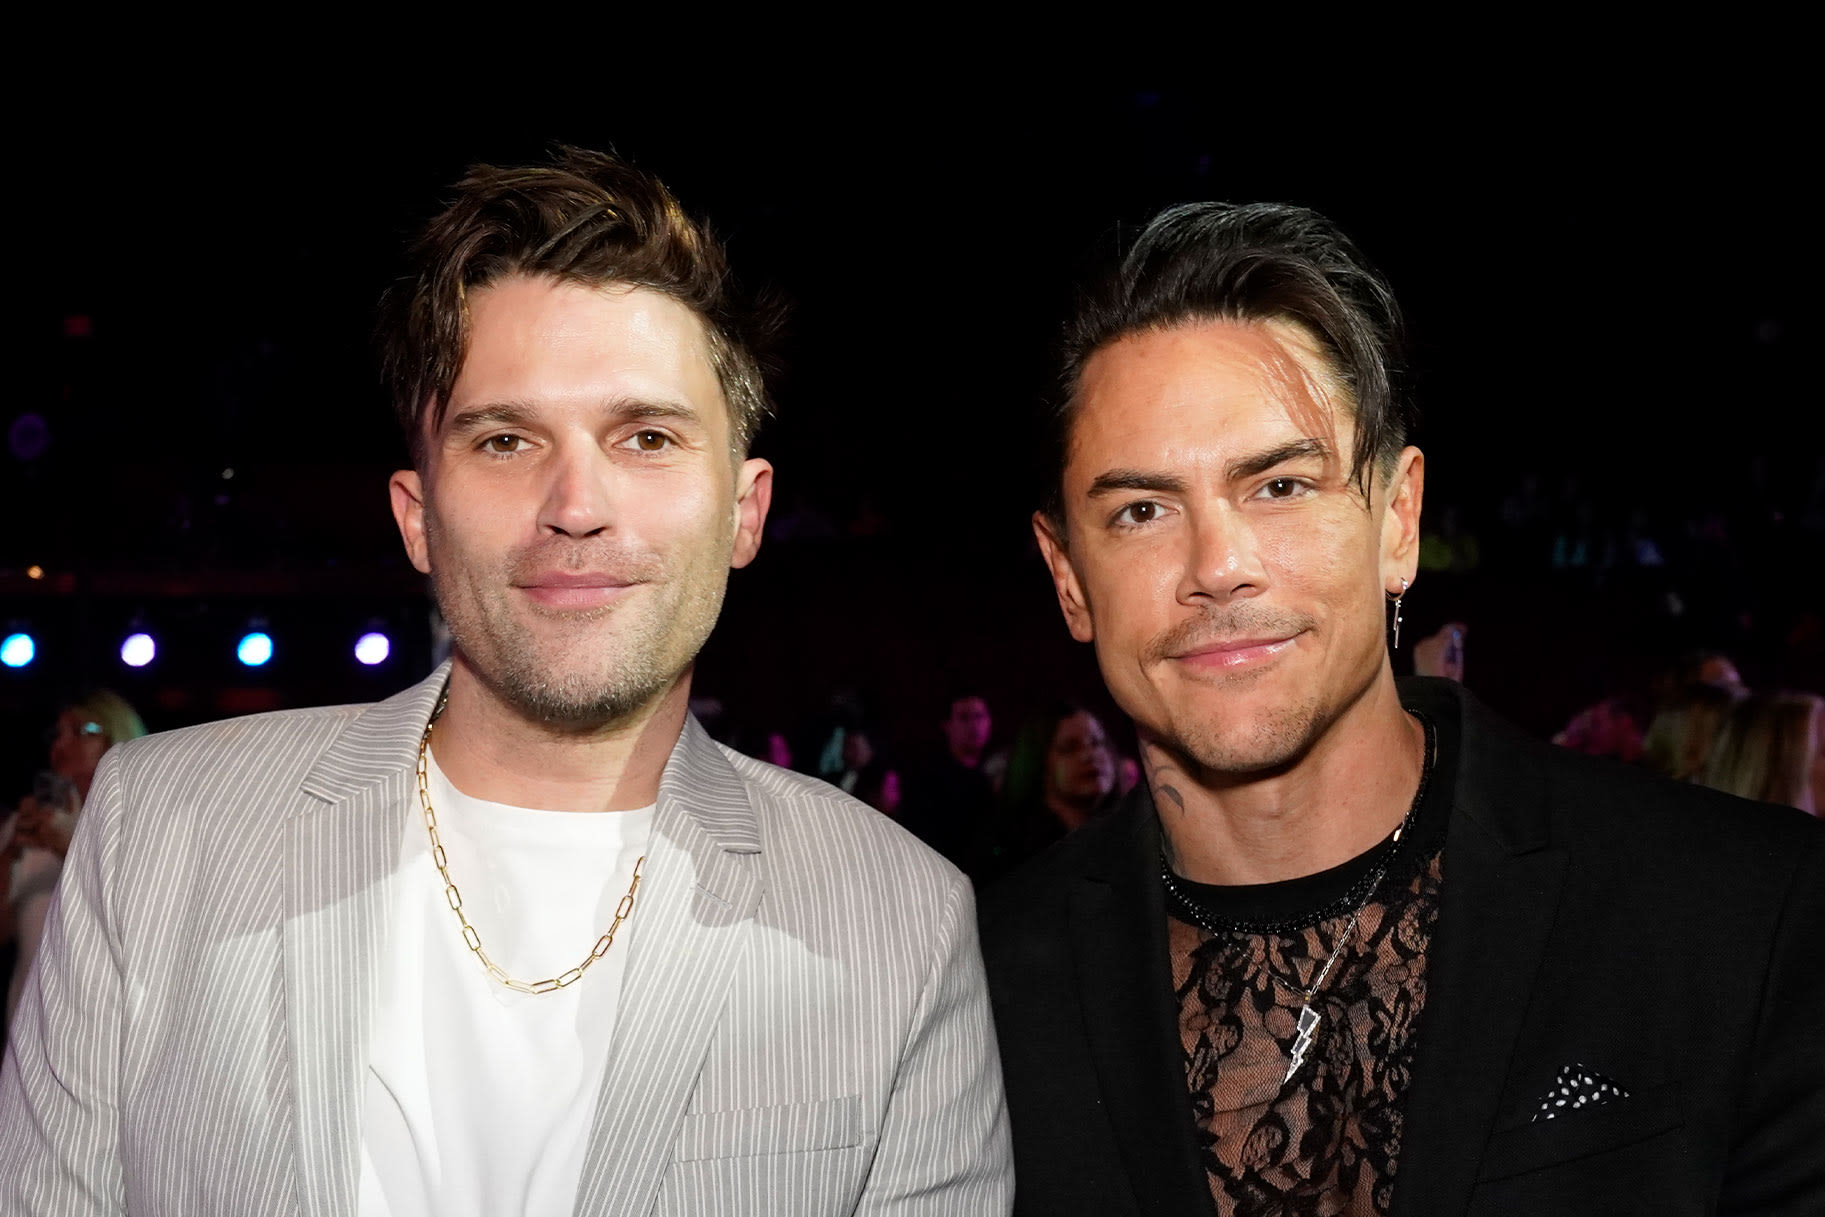 Tom Schwartz Is Relaunching His Whiskey Brand with Tom Sandoval: "Super Stoked" | Bravo TV Official Site